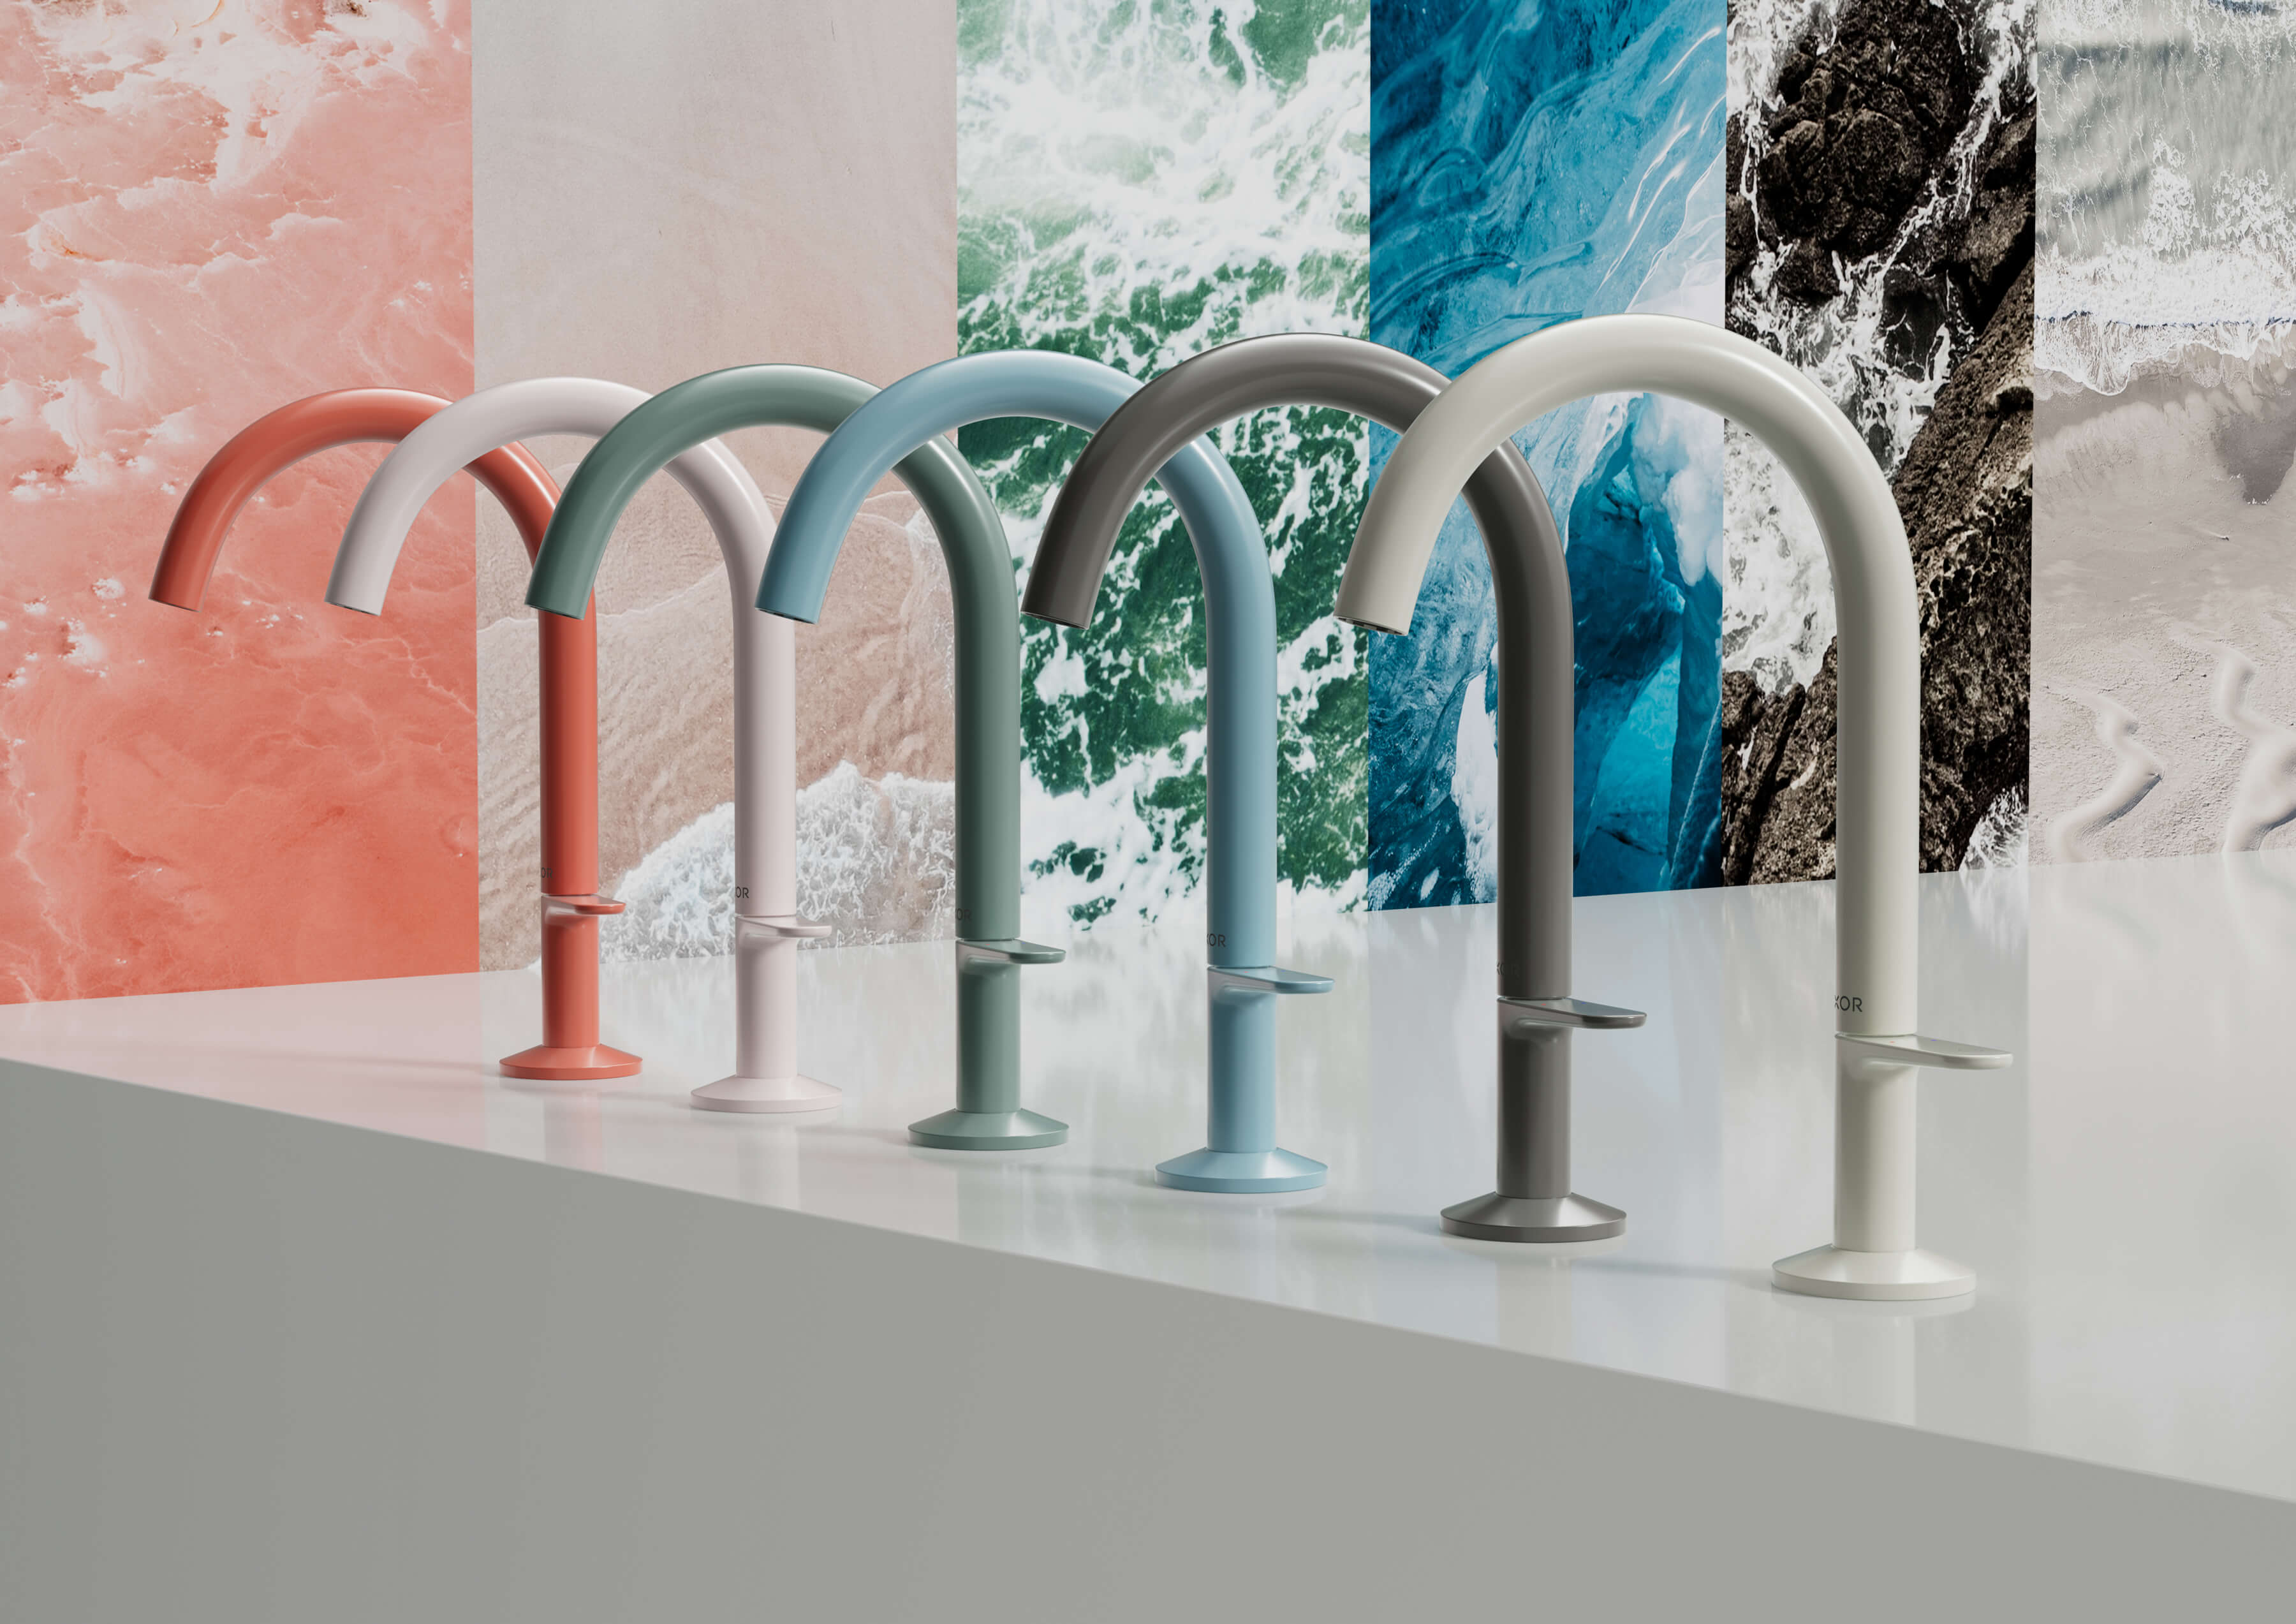 Philippe Starck and Axor Launch New Faucet Collection